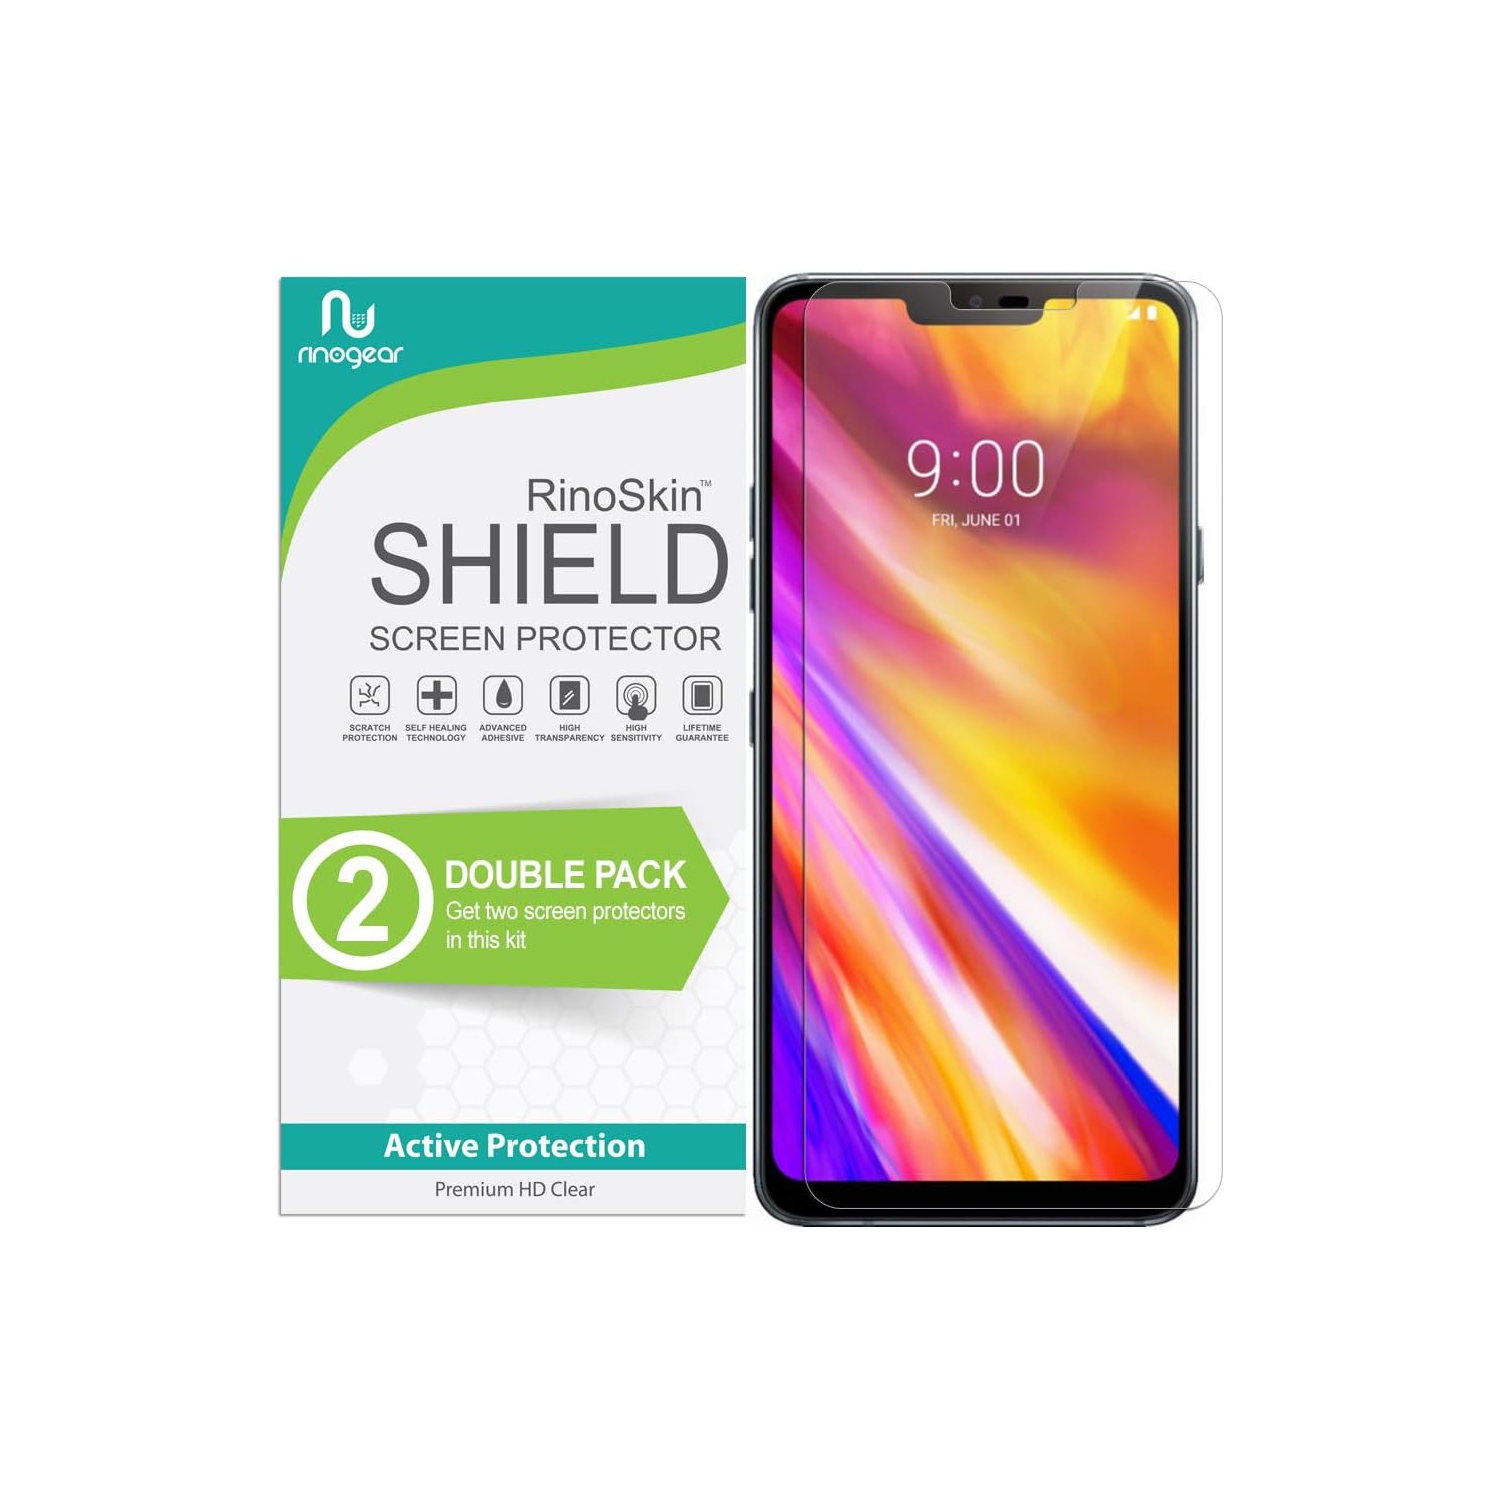 (2-Pack) Screen Protector for LG G7 ThinQ (6.1" - inch) Screen Protector Case Friendly Accessories Flexible